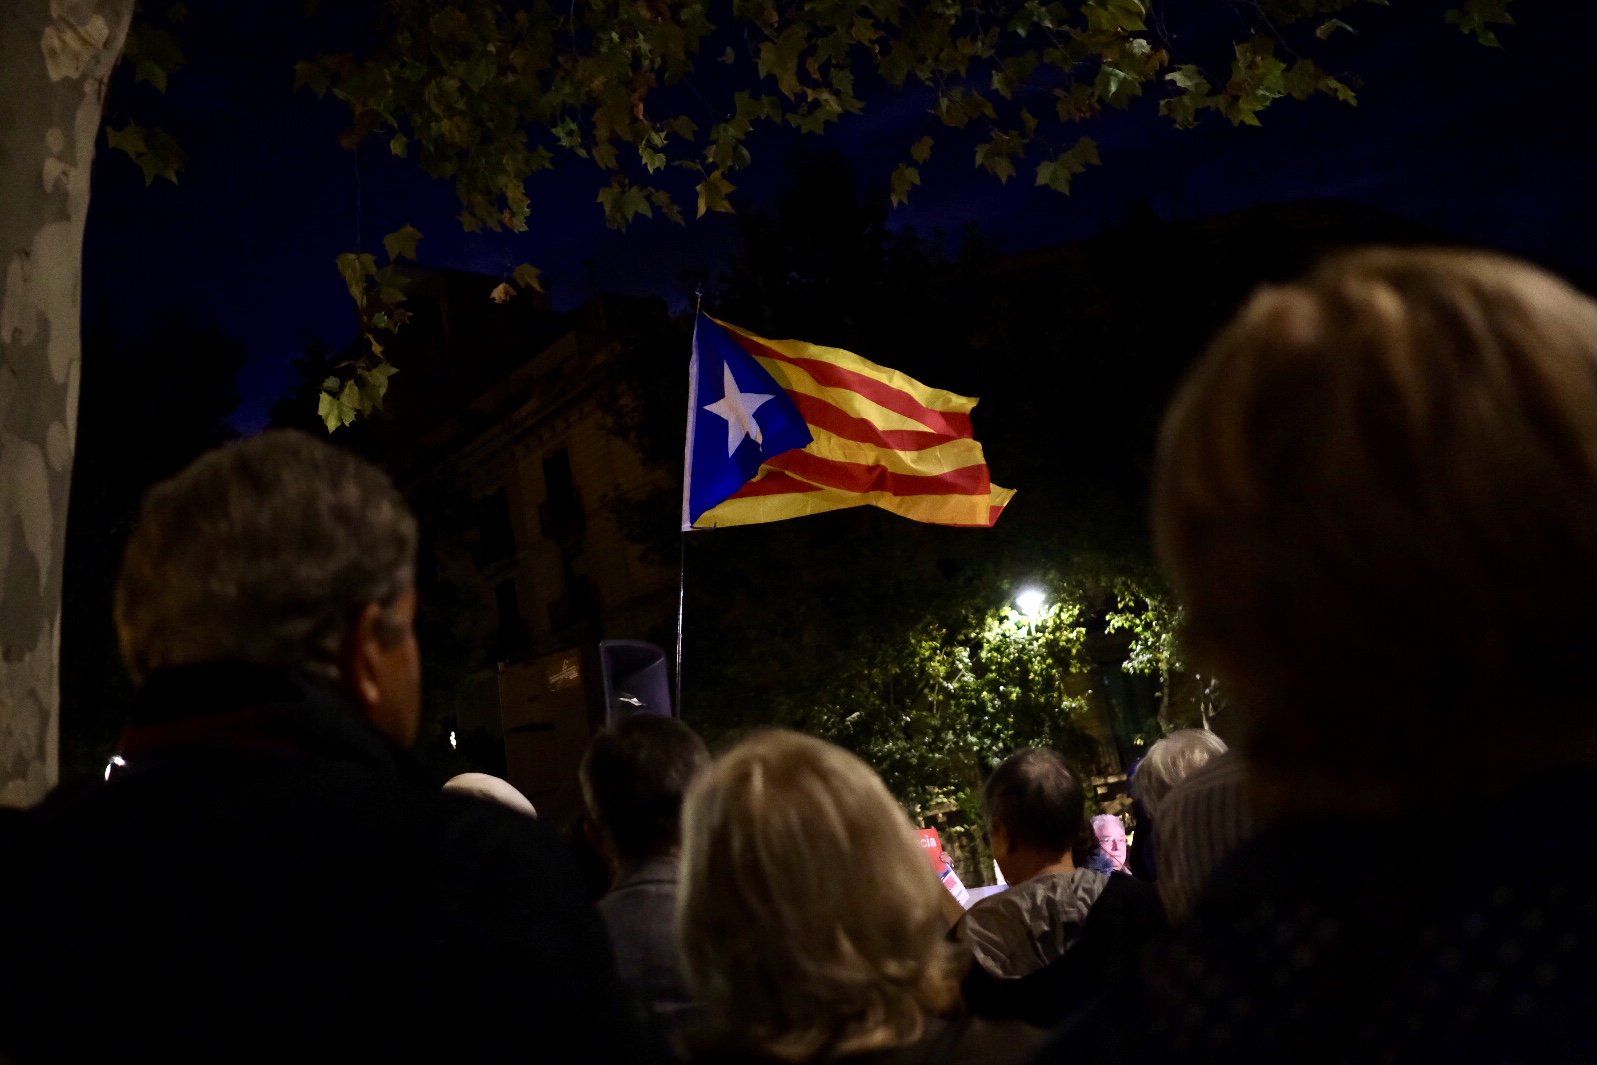 Return to the schools recalls the night that made possible Catalonia's 2017 referendum